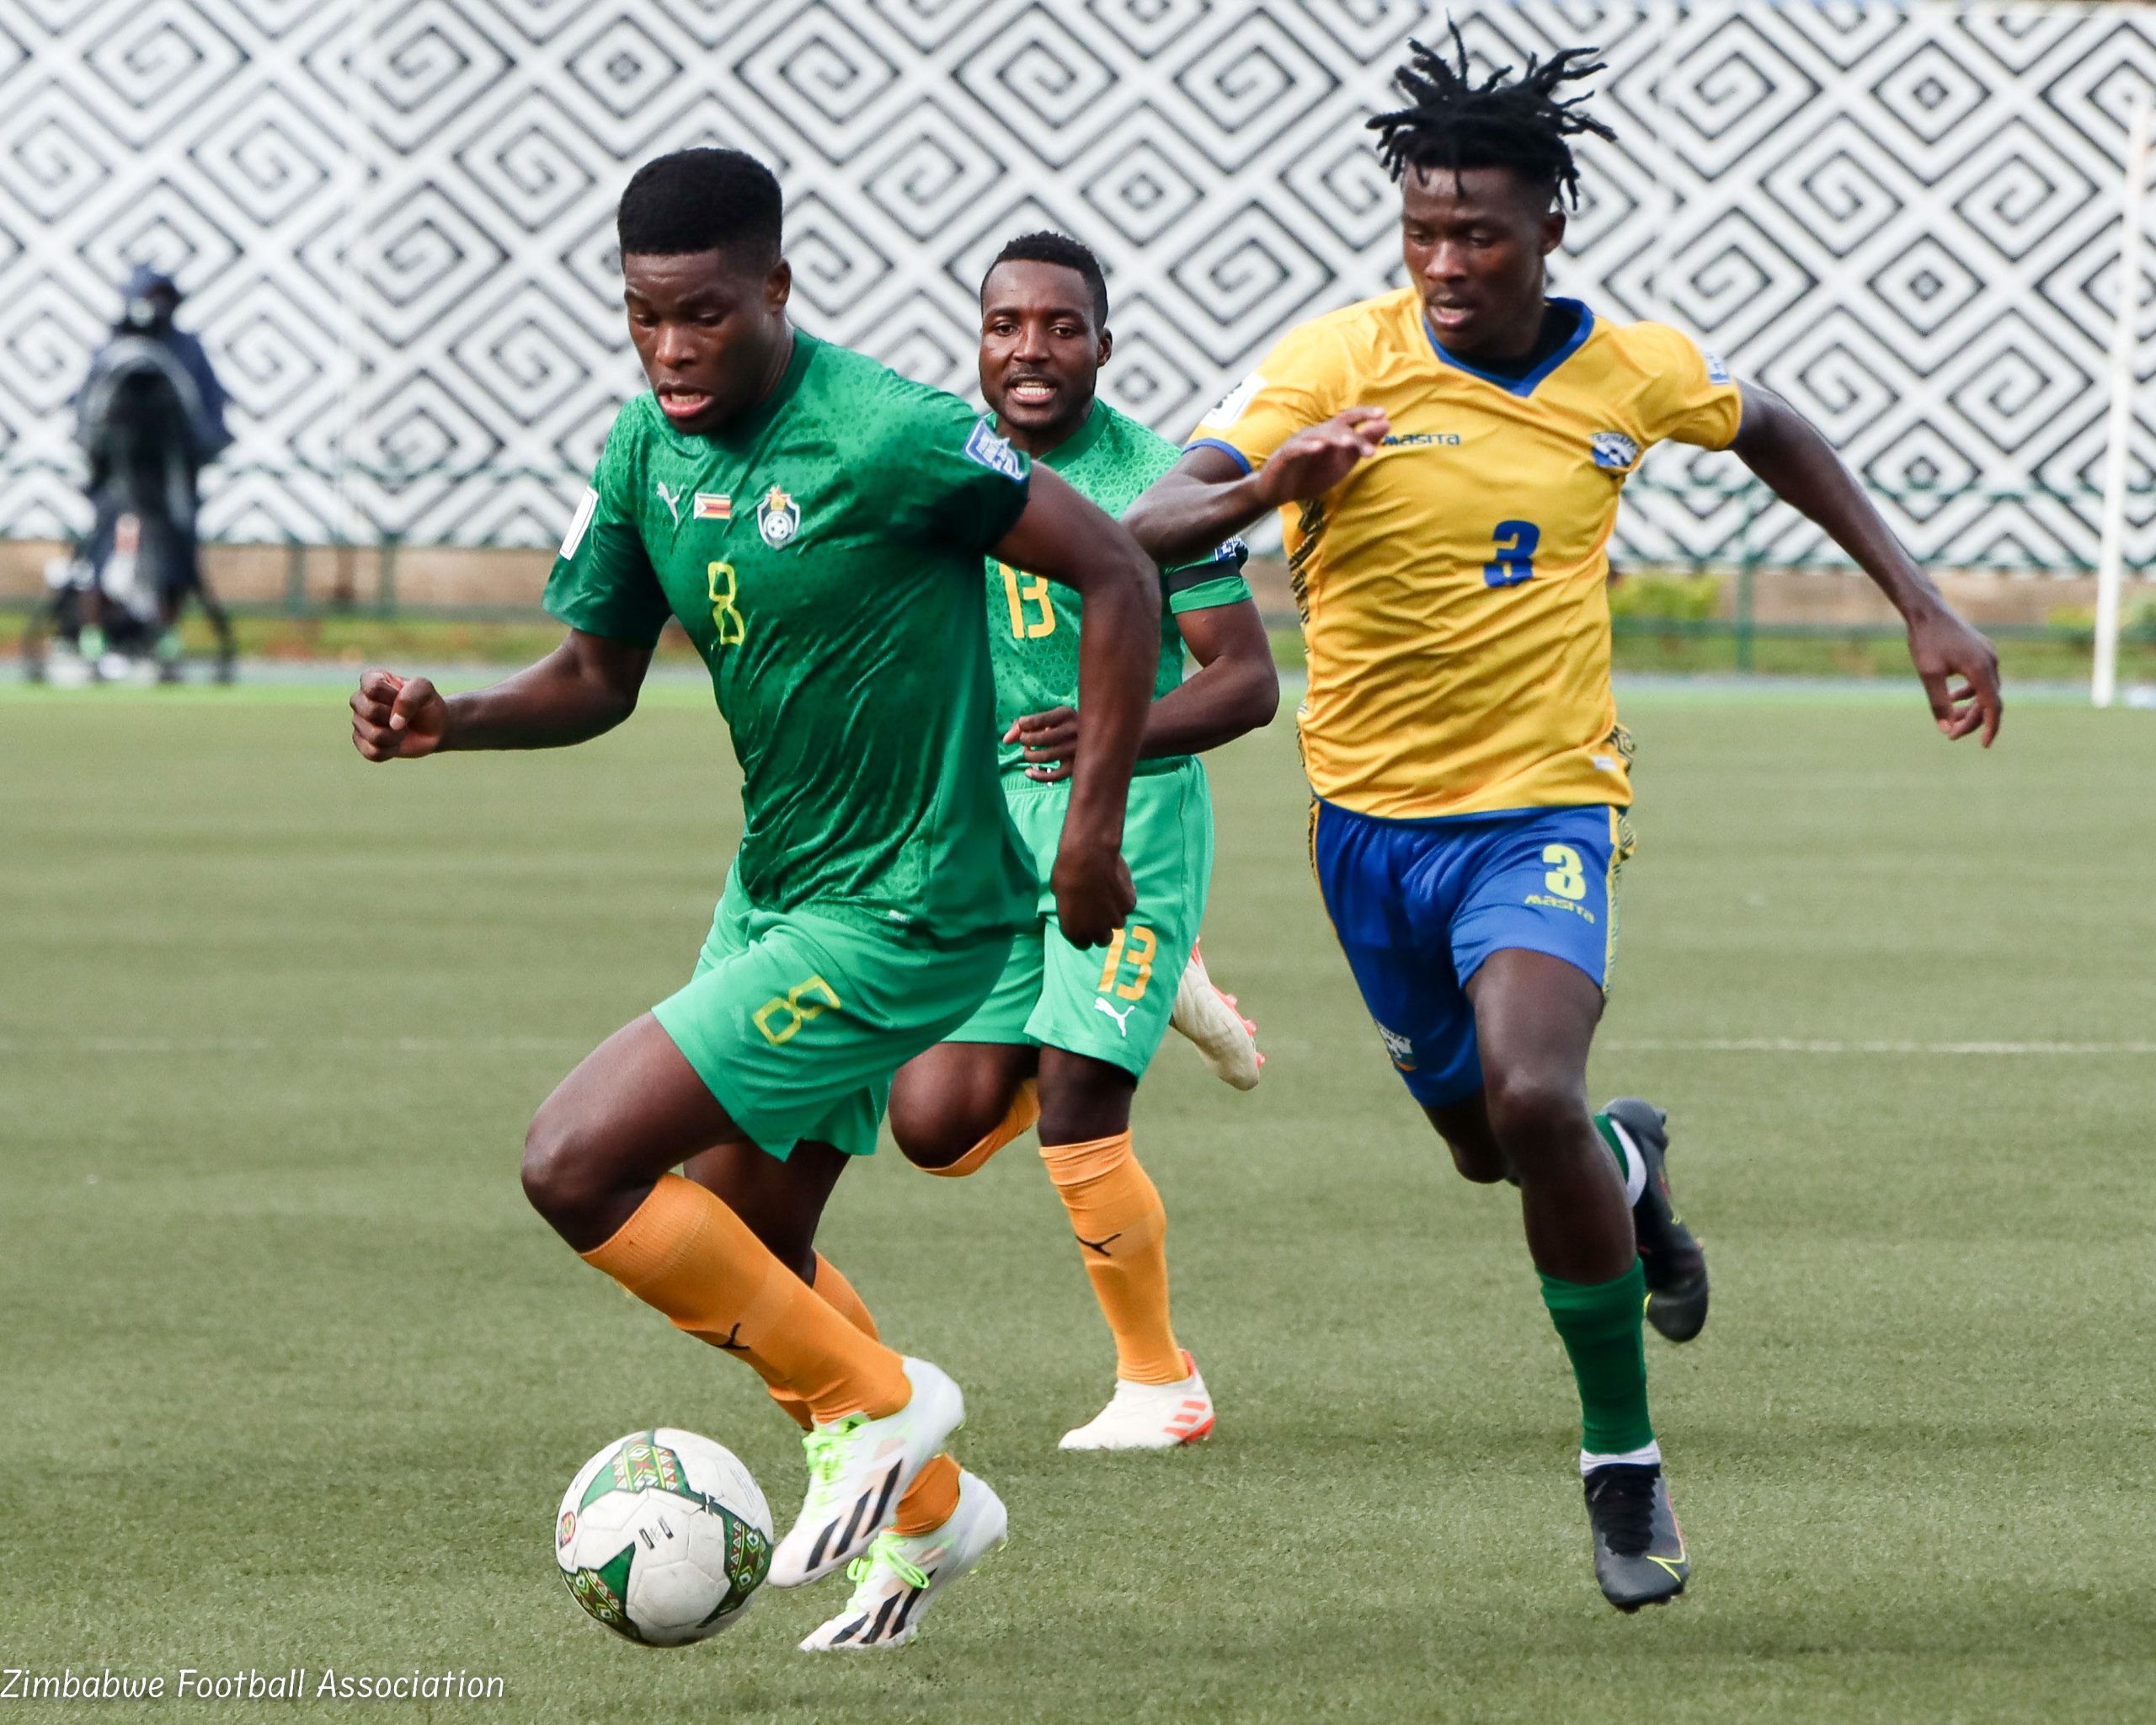 Zimbabwe international Marshall Munetsi tussles for the ball with Rwandese player during a 2026 FIFA World Cup qualifiers Group C encounter played at Huye Stadium on 15th November 2023.